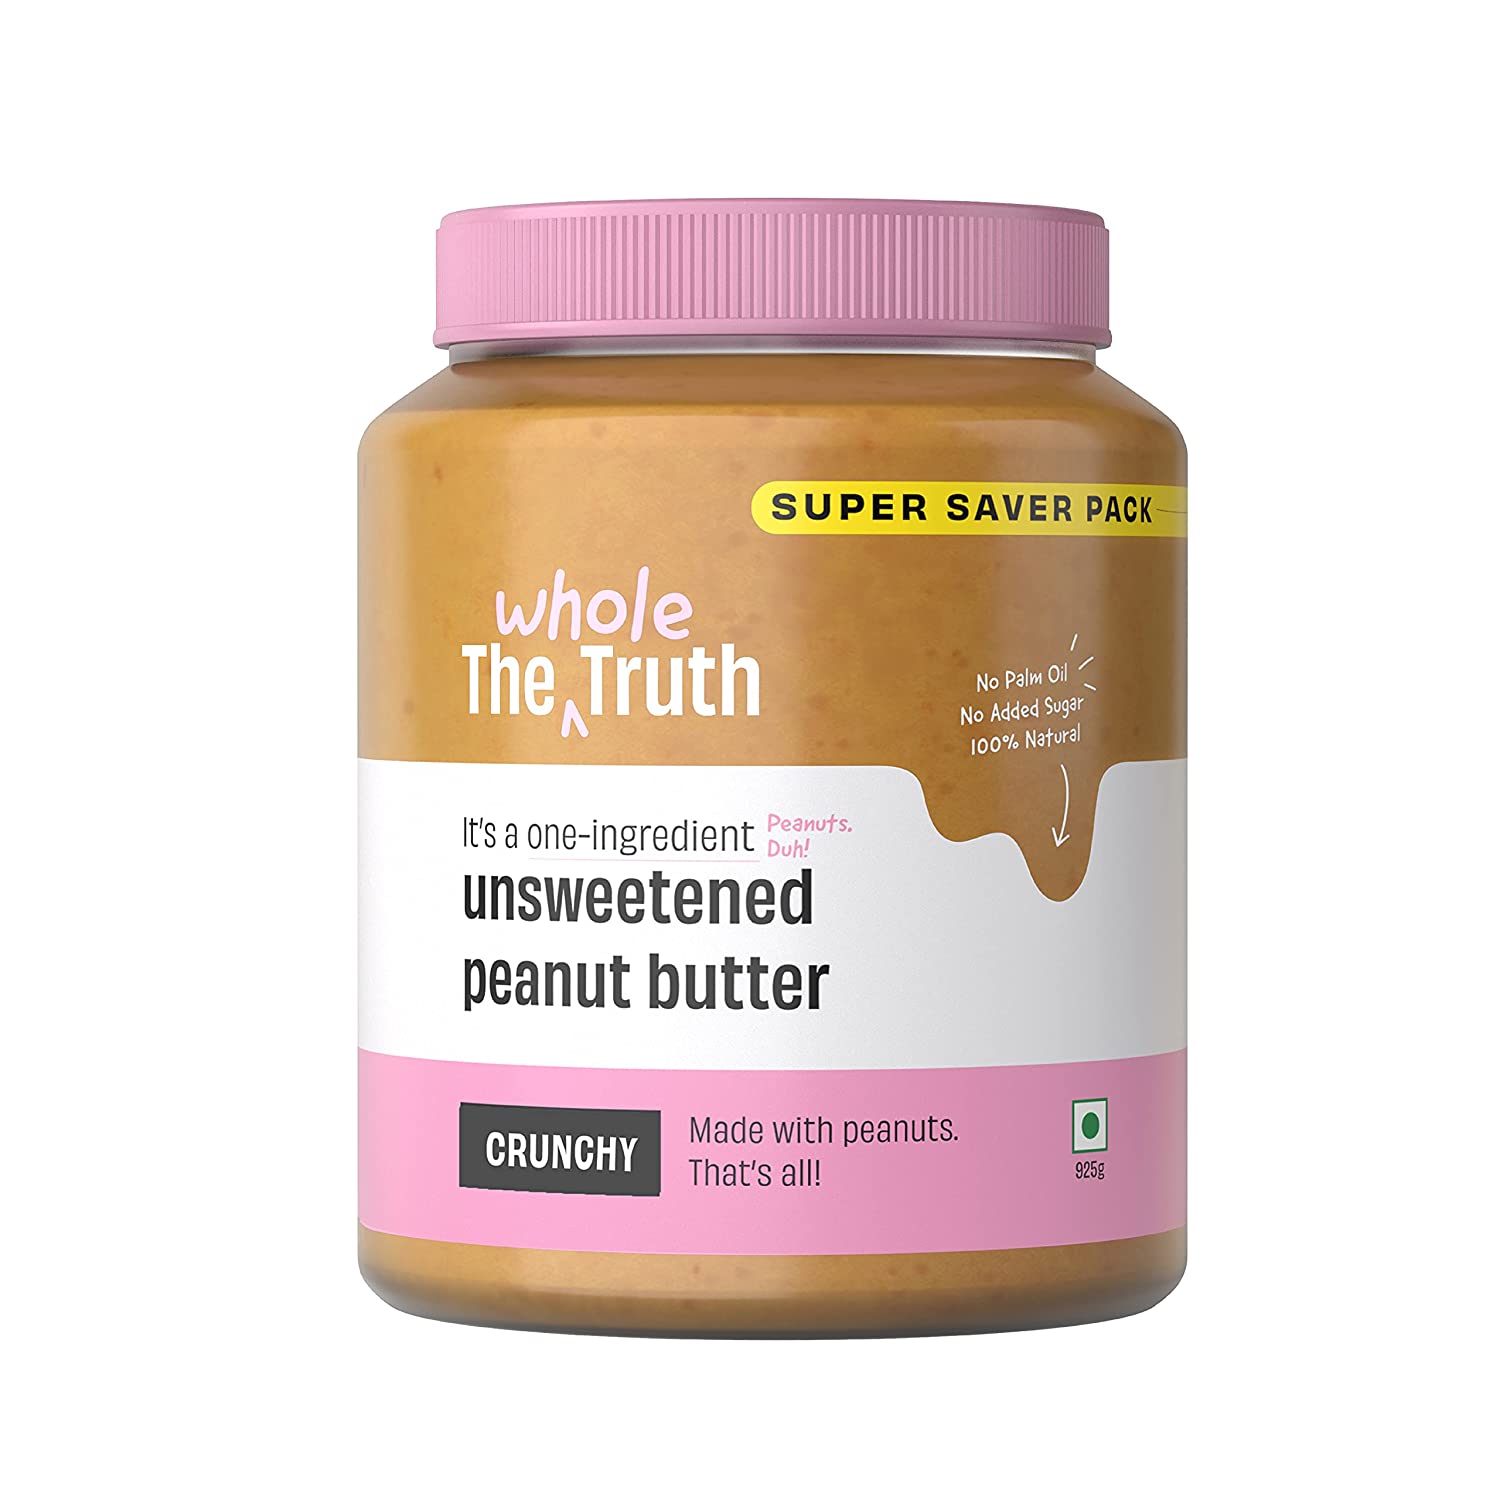 The Whole Truth Unsweetened Peanut Butter Crunchy Image